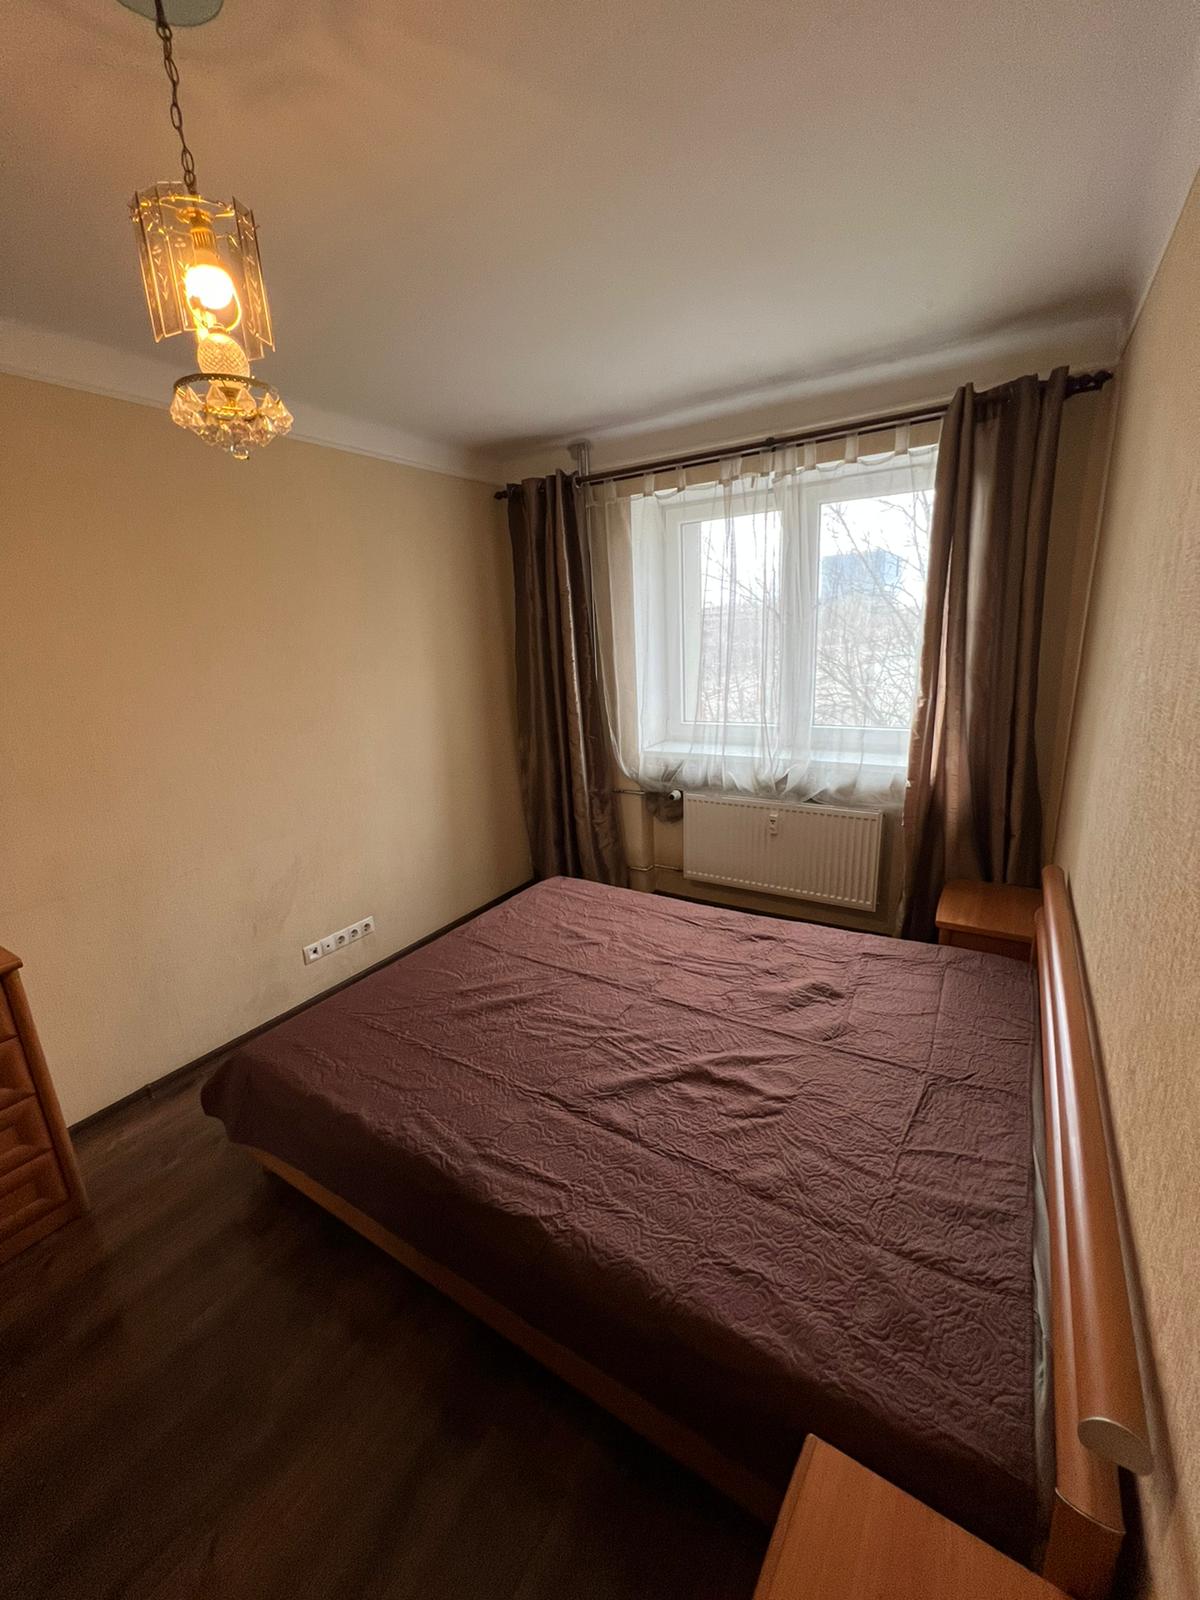 Apartment for rent, Hanzas street 8 - Image 1